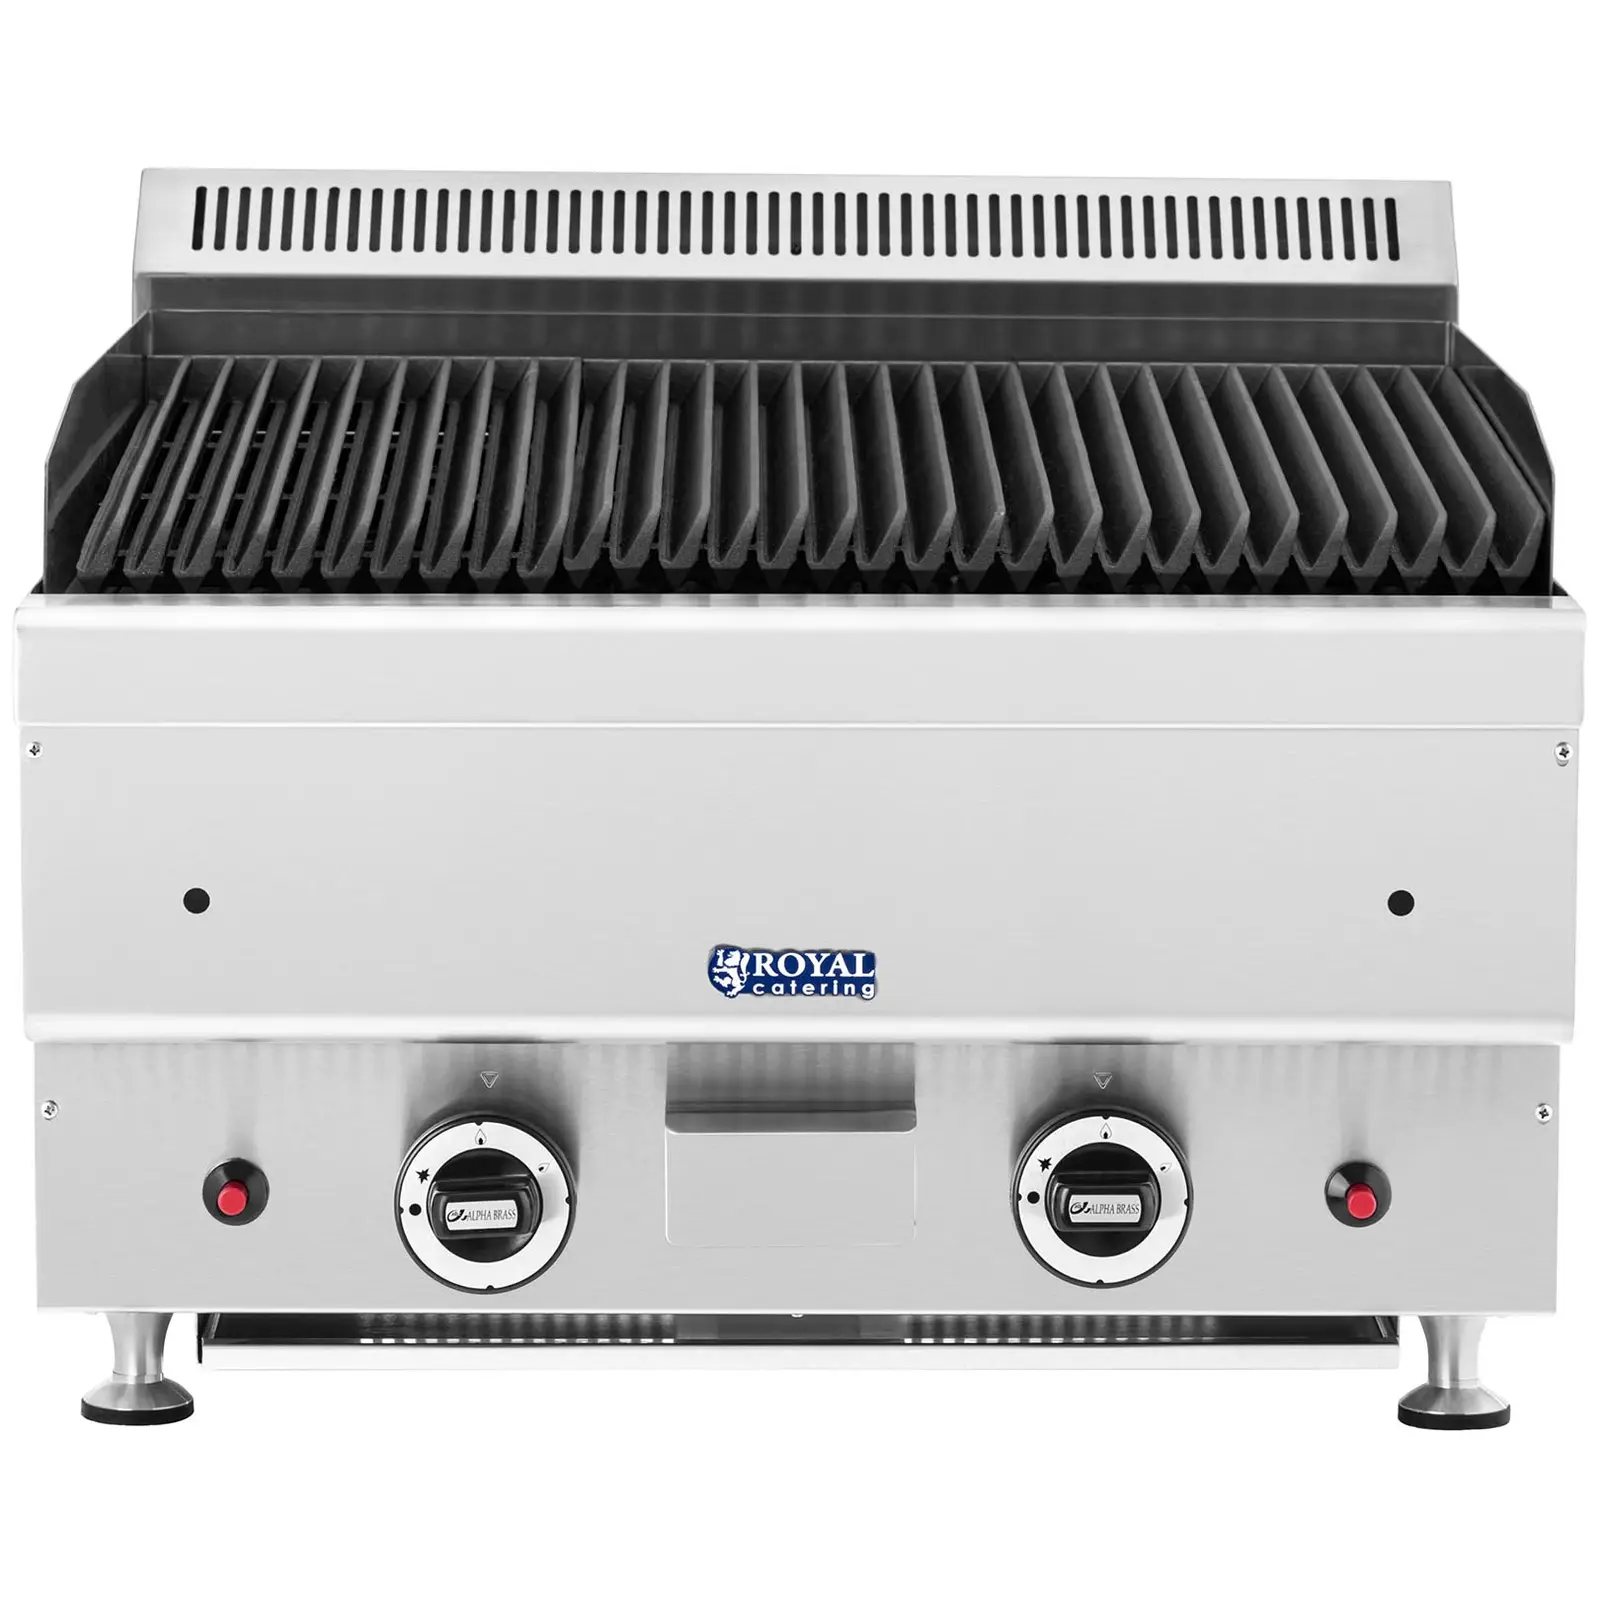 Lavasteengrill - 2 x 7200 W - 50 x 47 cm - 0 - 460 °C - Royal Catering